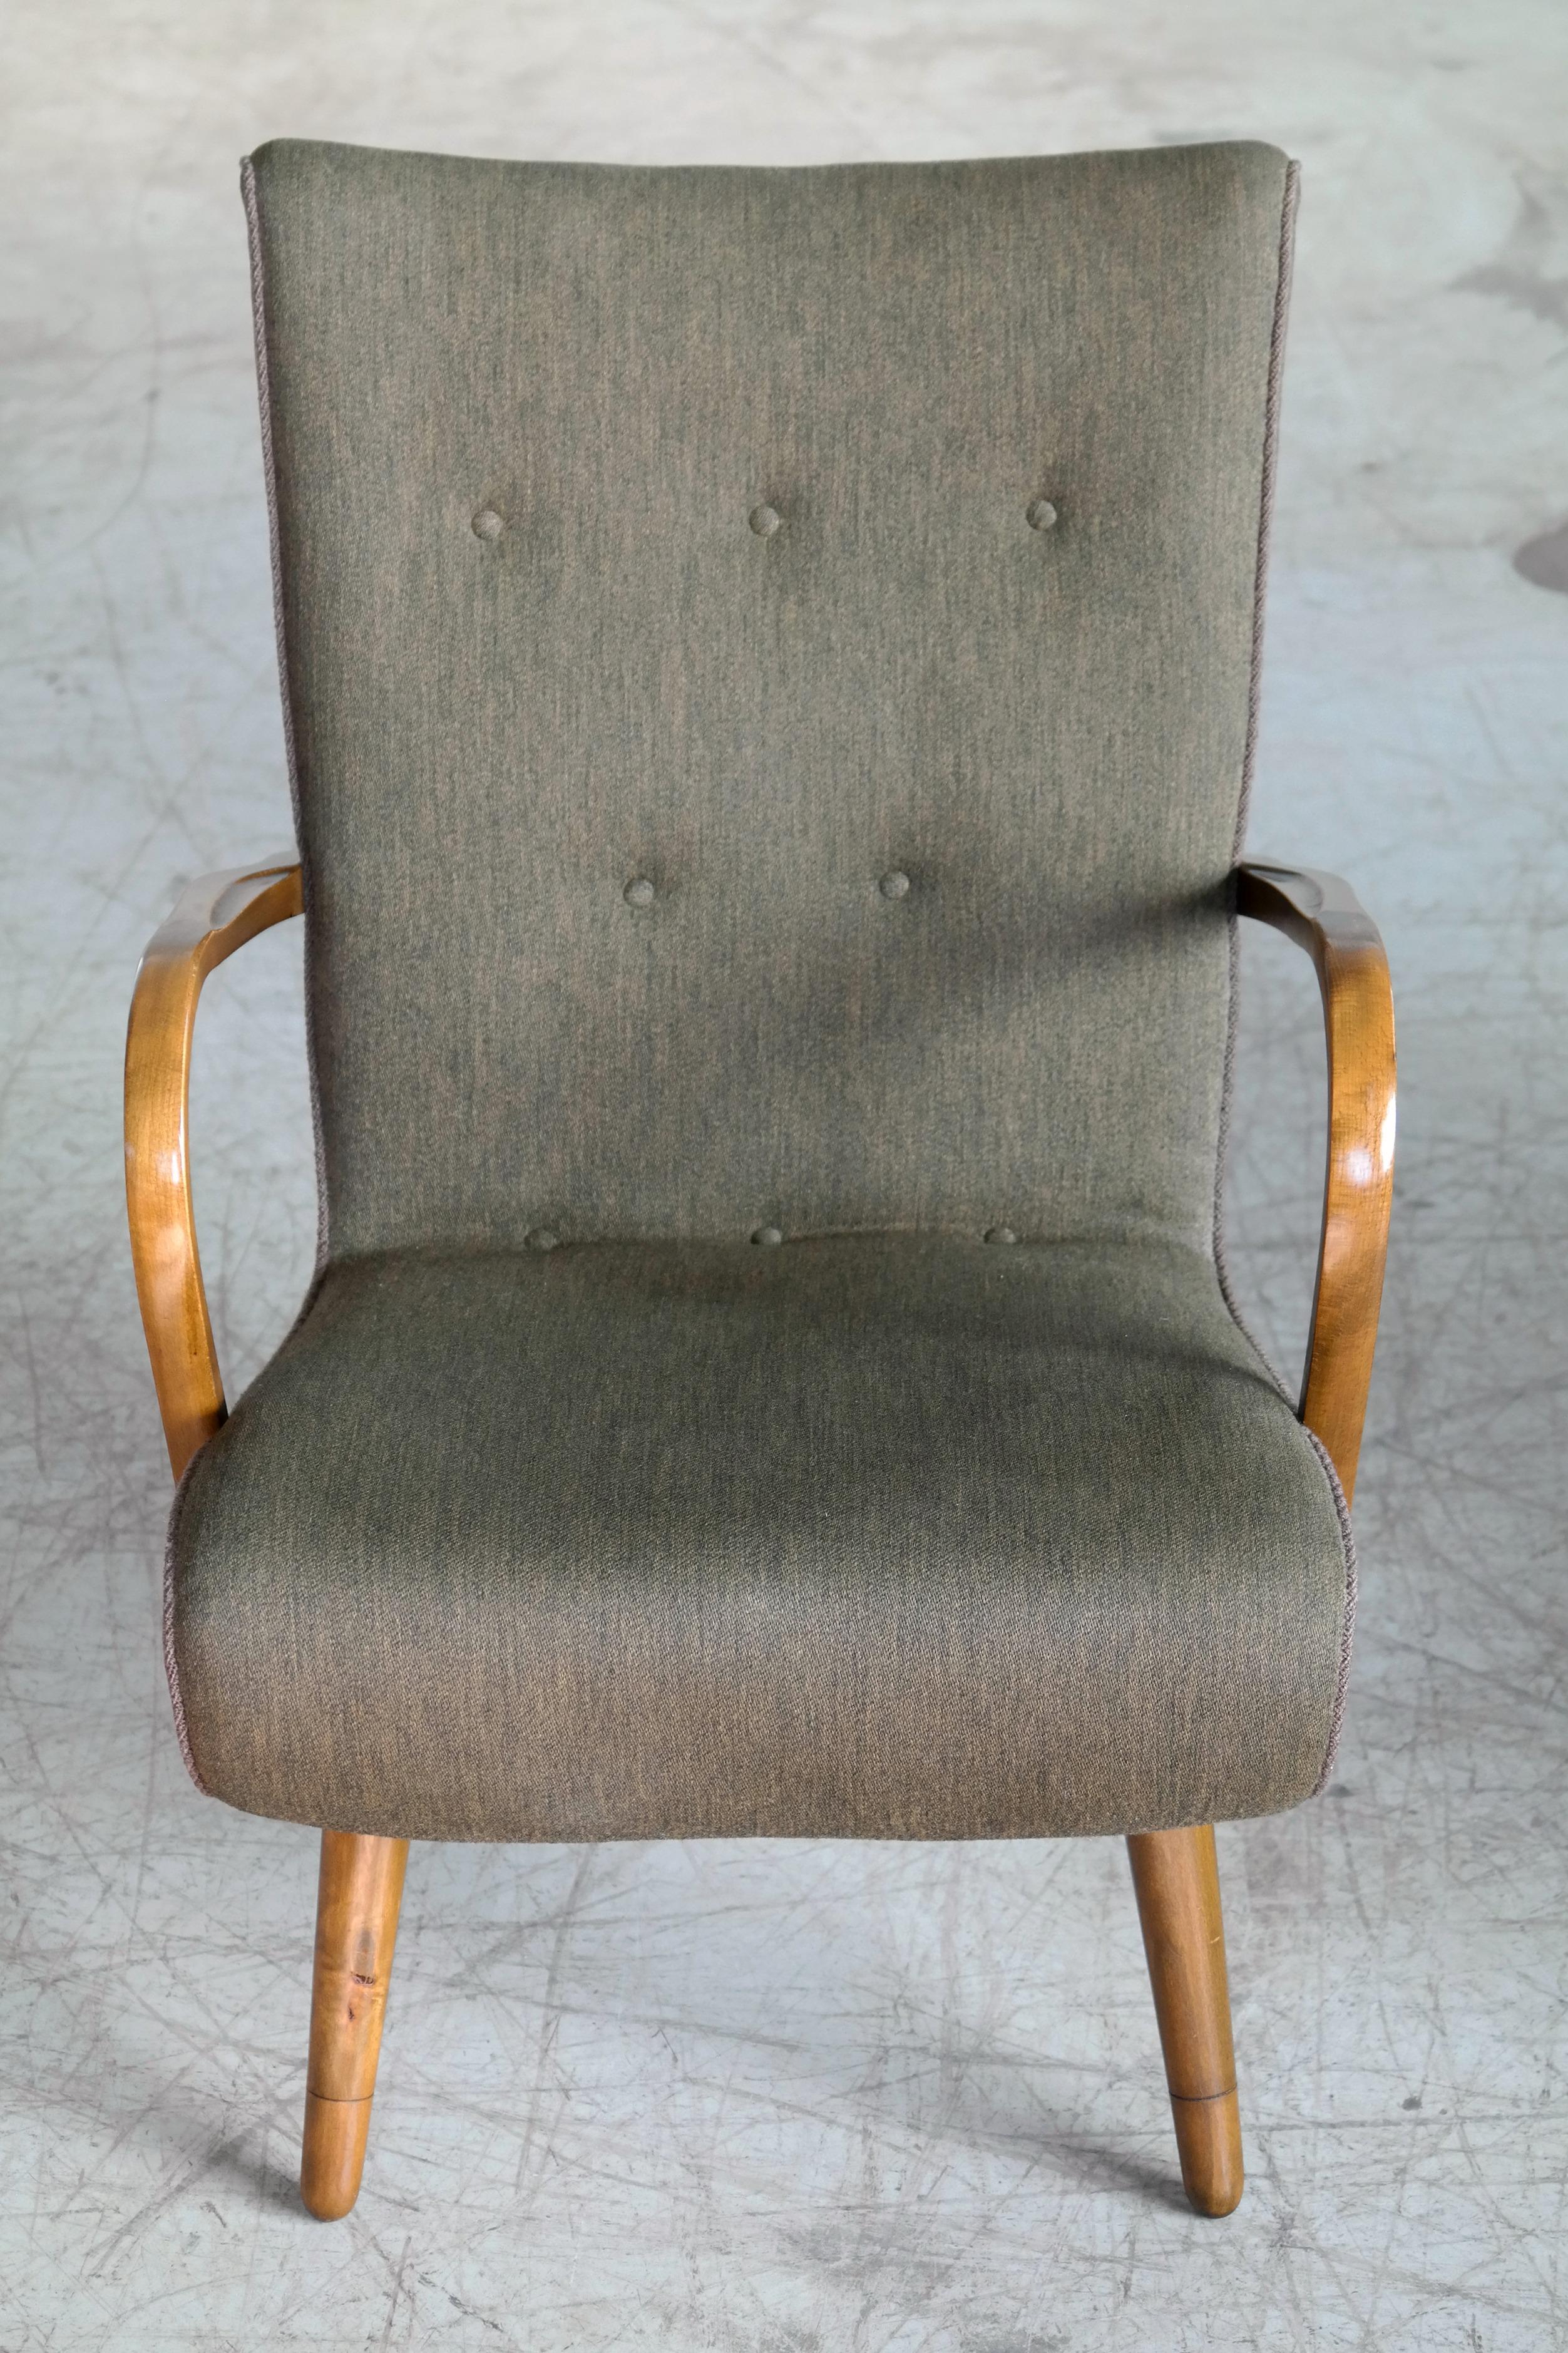 Unusual and very beautiful sculptural lounge chair with curved dark brown armrests in stained beech wood made by unknown Danish maker in the 1950s. These chairs are found from time to time in Denmark and are clearly of Danish origin but the style in